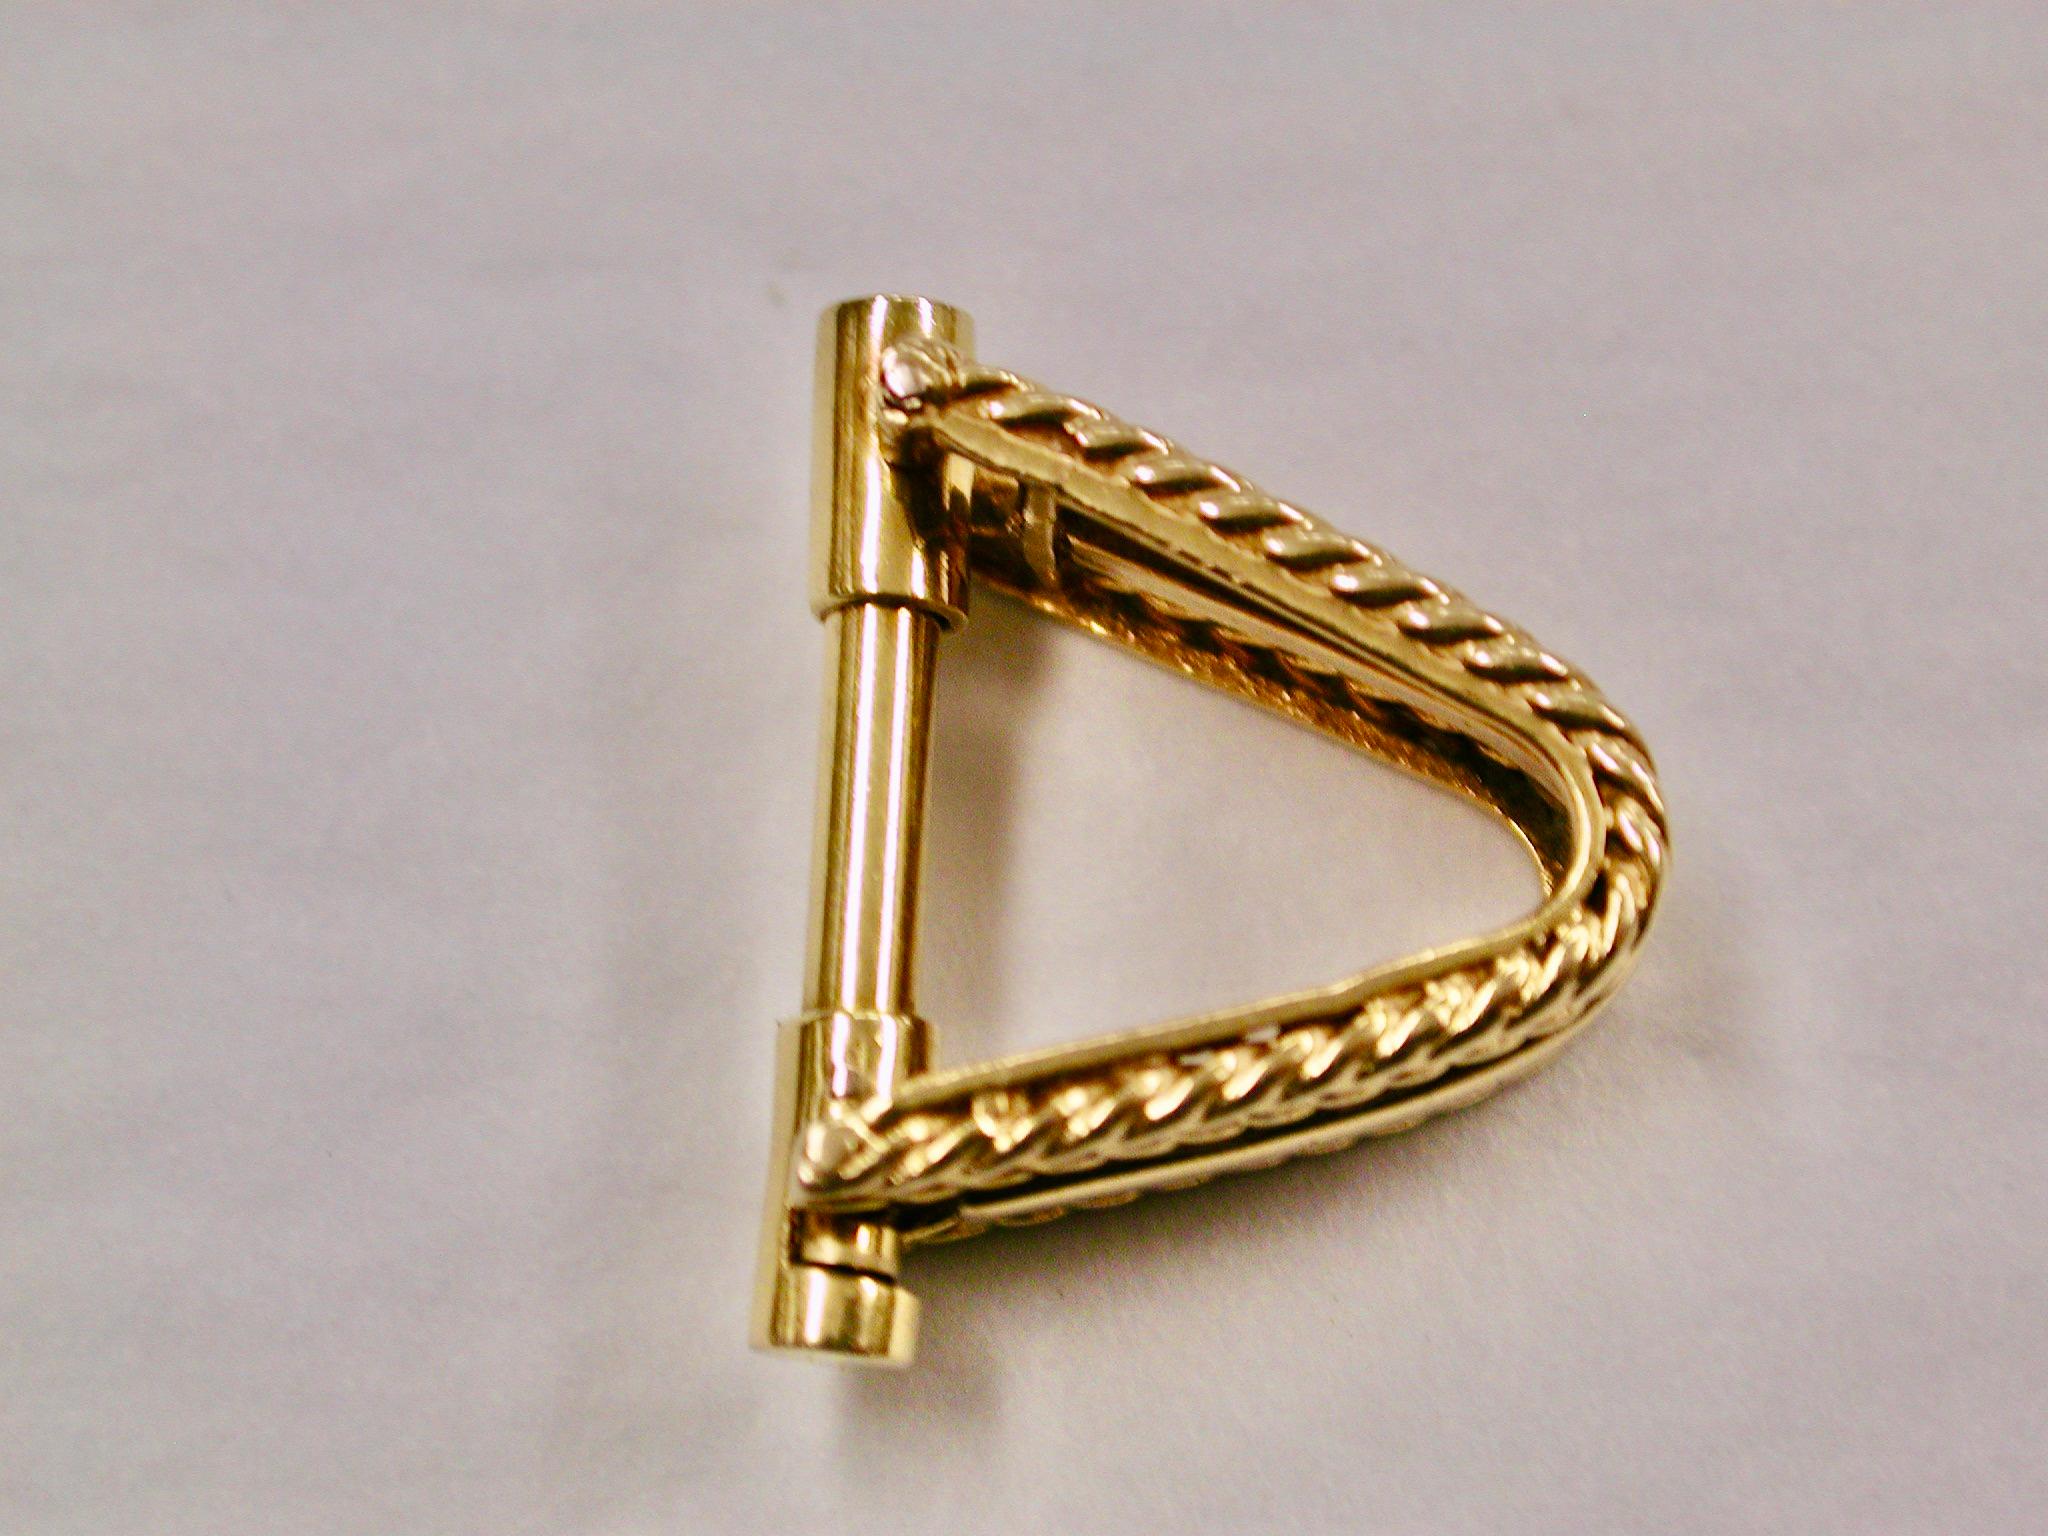 Pair of Men's 18ct Gold Cufflinks, Braided Foxlink with Sprung Bar Fitting, 1957 For Sale 2